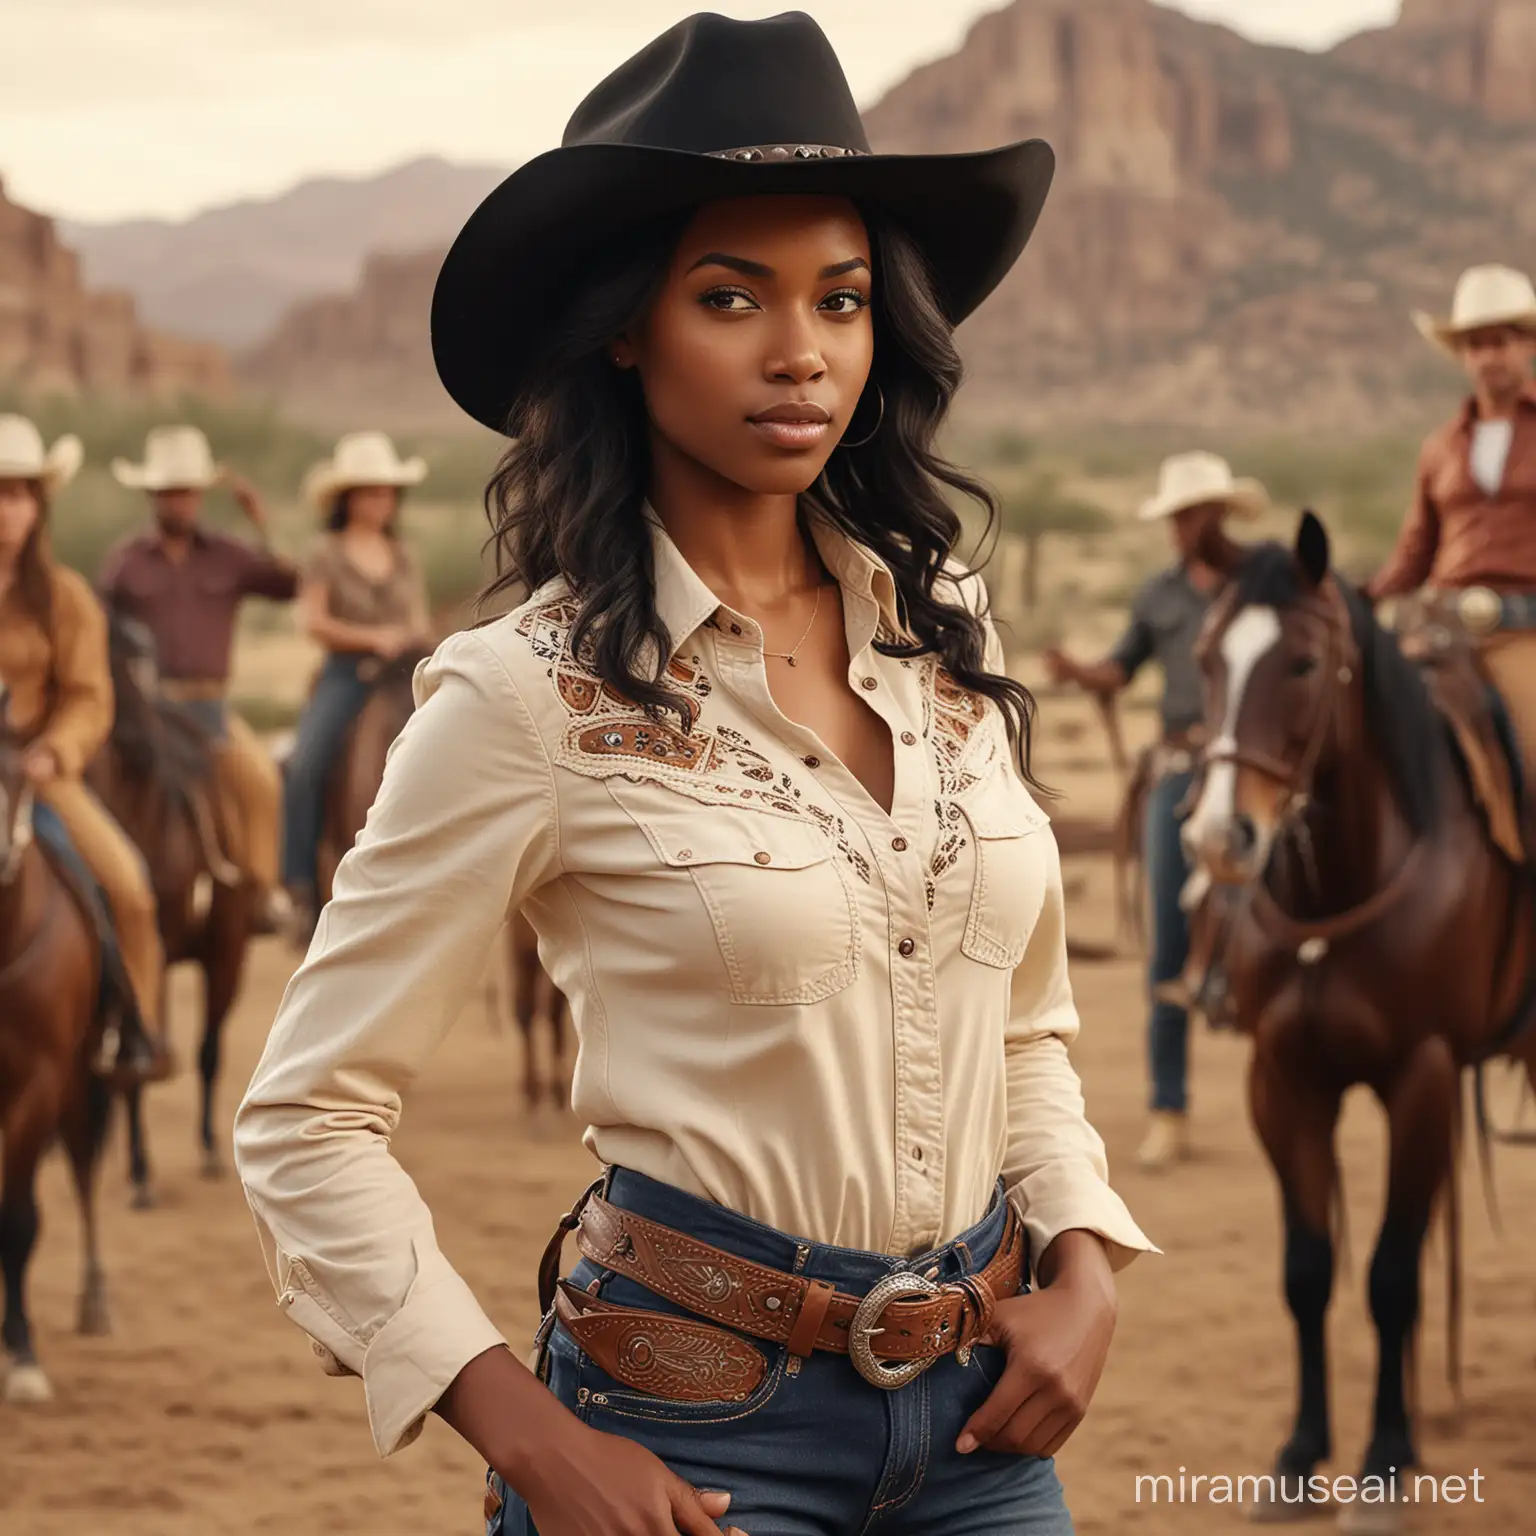 Stunning Black Cowgirl at Rodeo Party Detailed Portrait in Cowboy Art Style